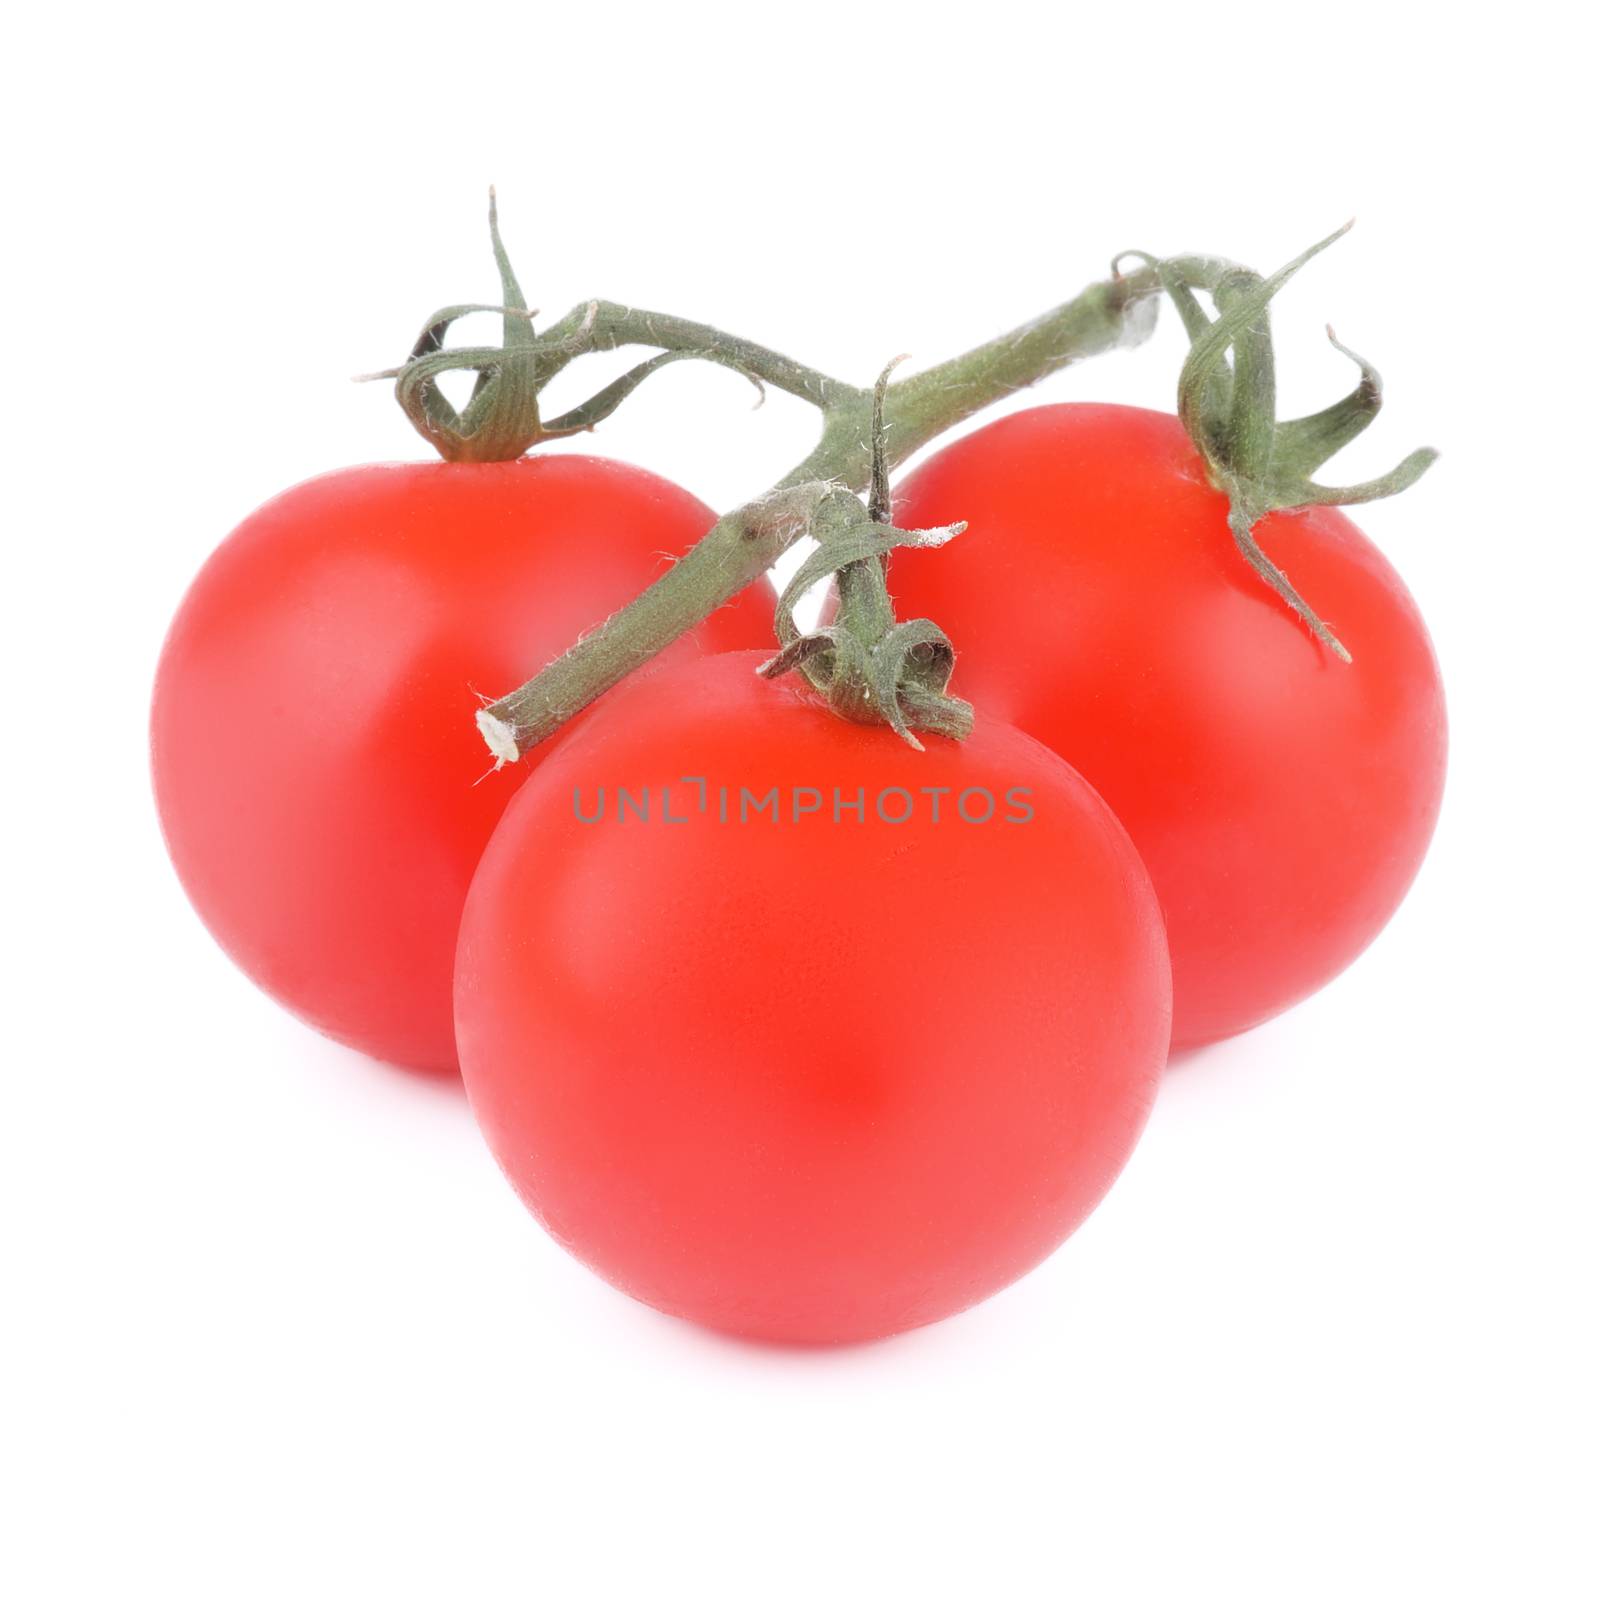 Tomatoes with Twigs by zhekos